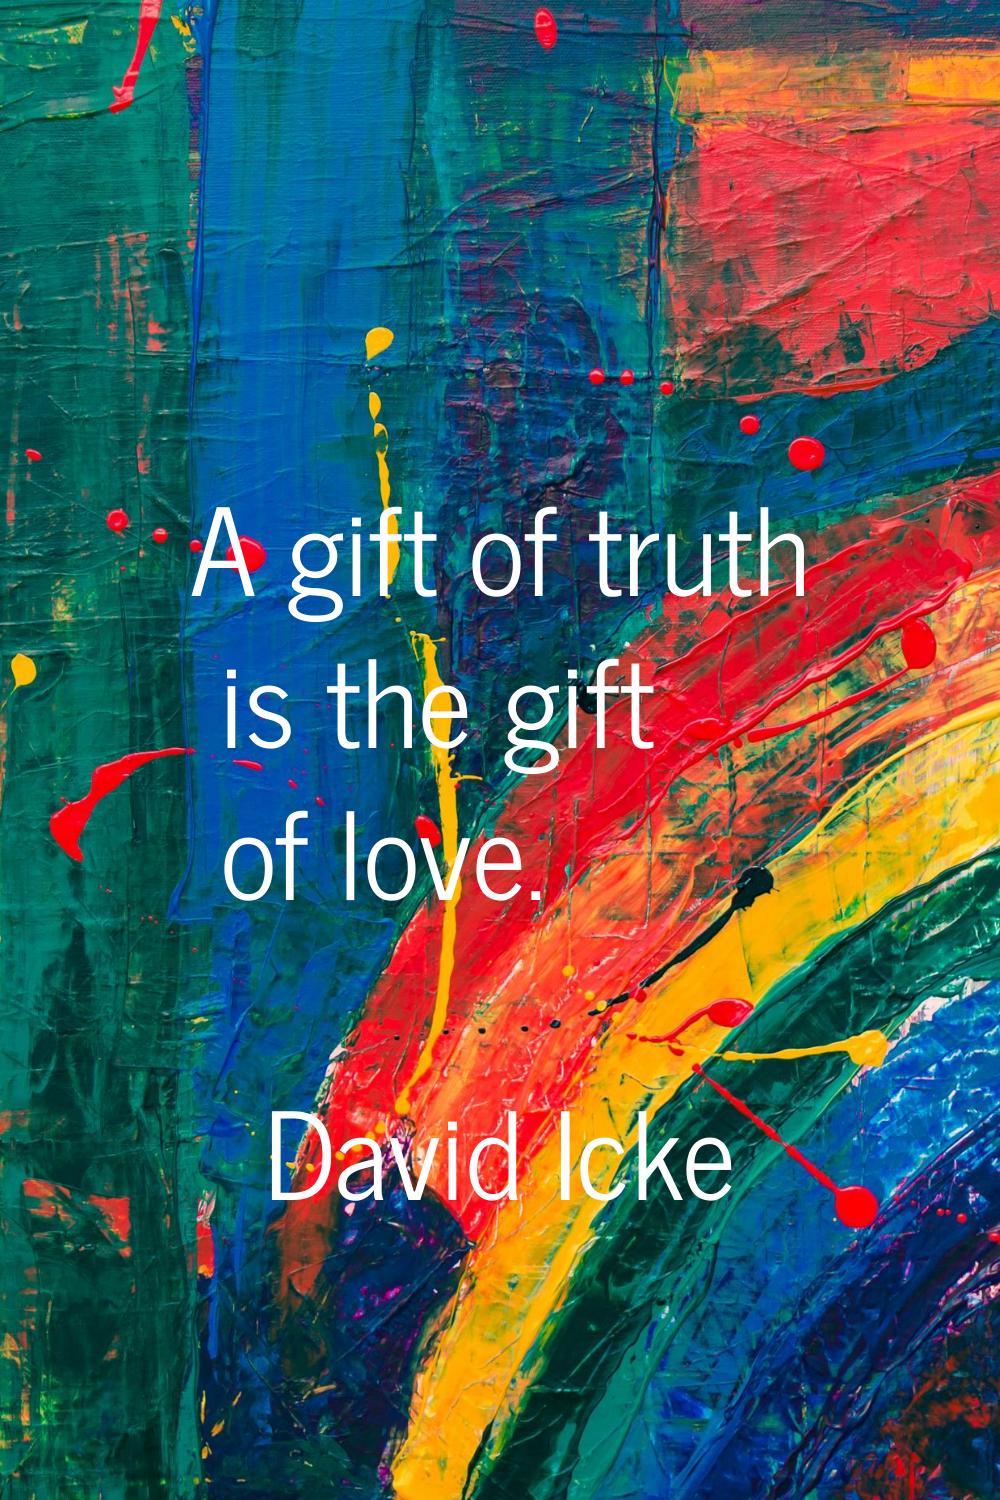 A gift of truth is the gift of love.